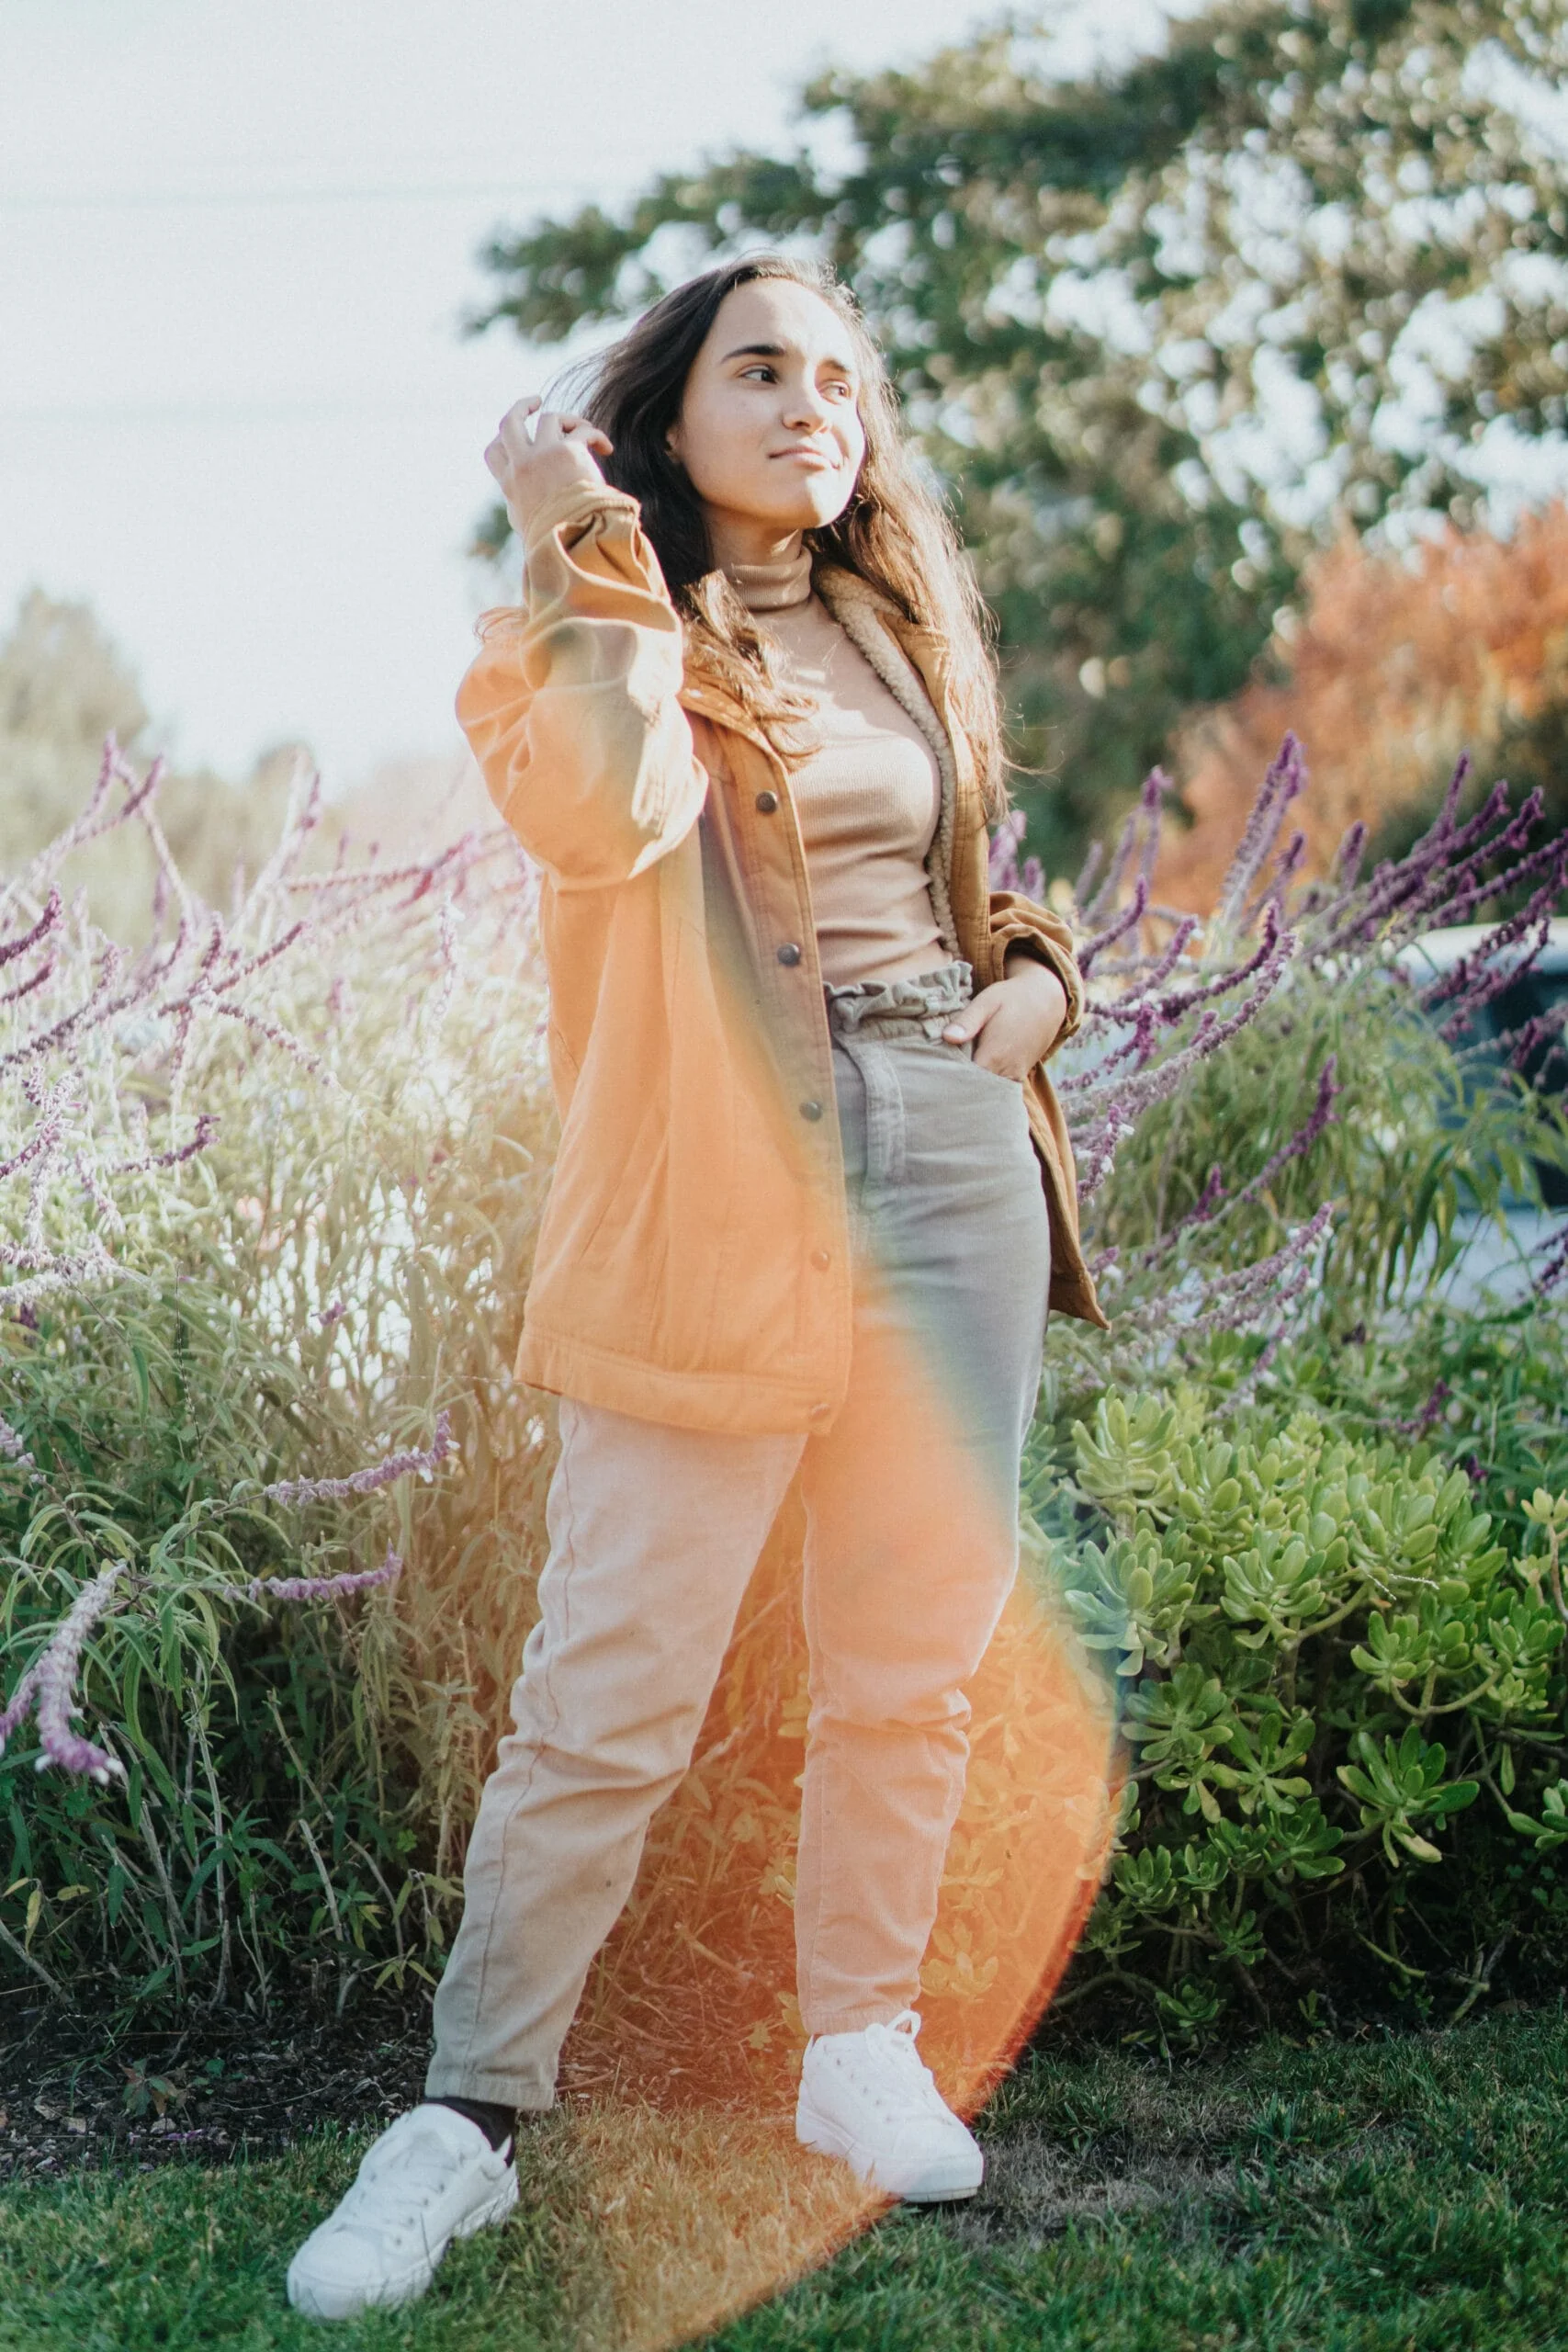 A woman, dressed in a tan jacket and khaki pants, skillfully captures beautiful moments in a field as a family photographer or luxury photography services provider.